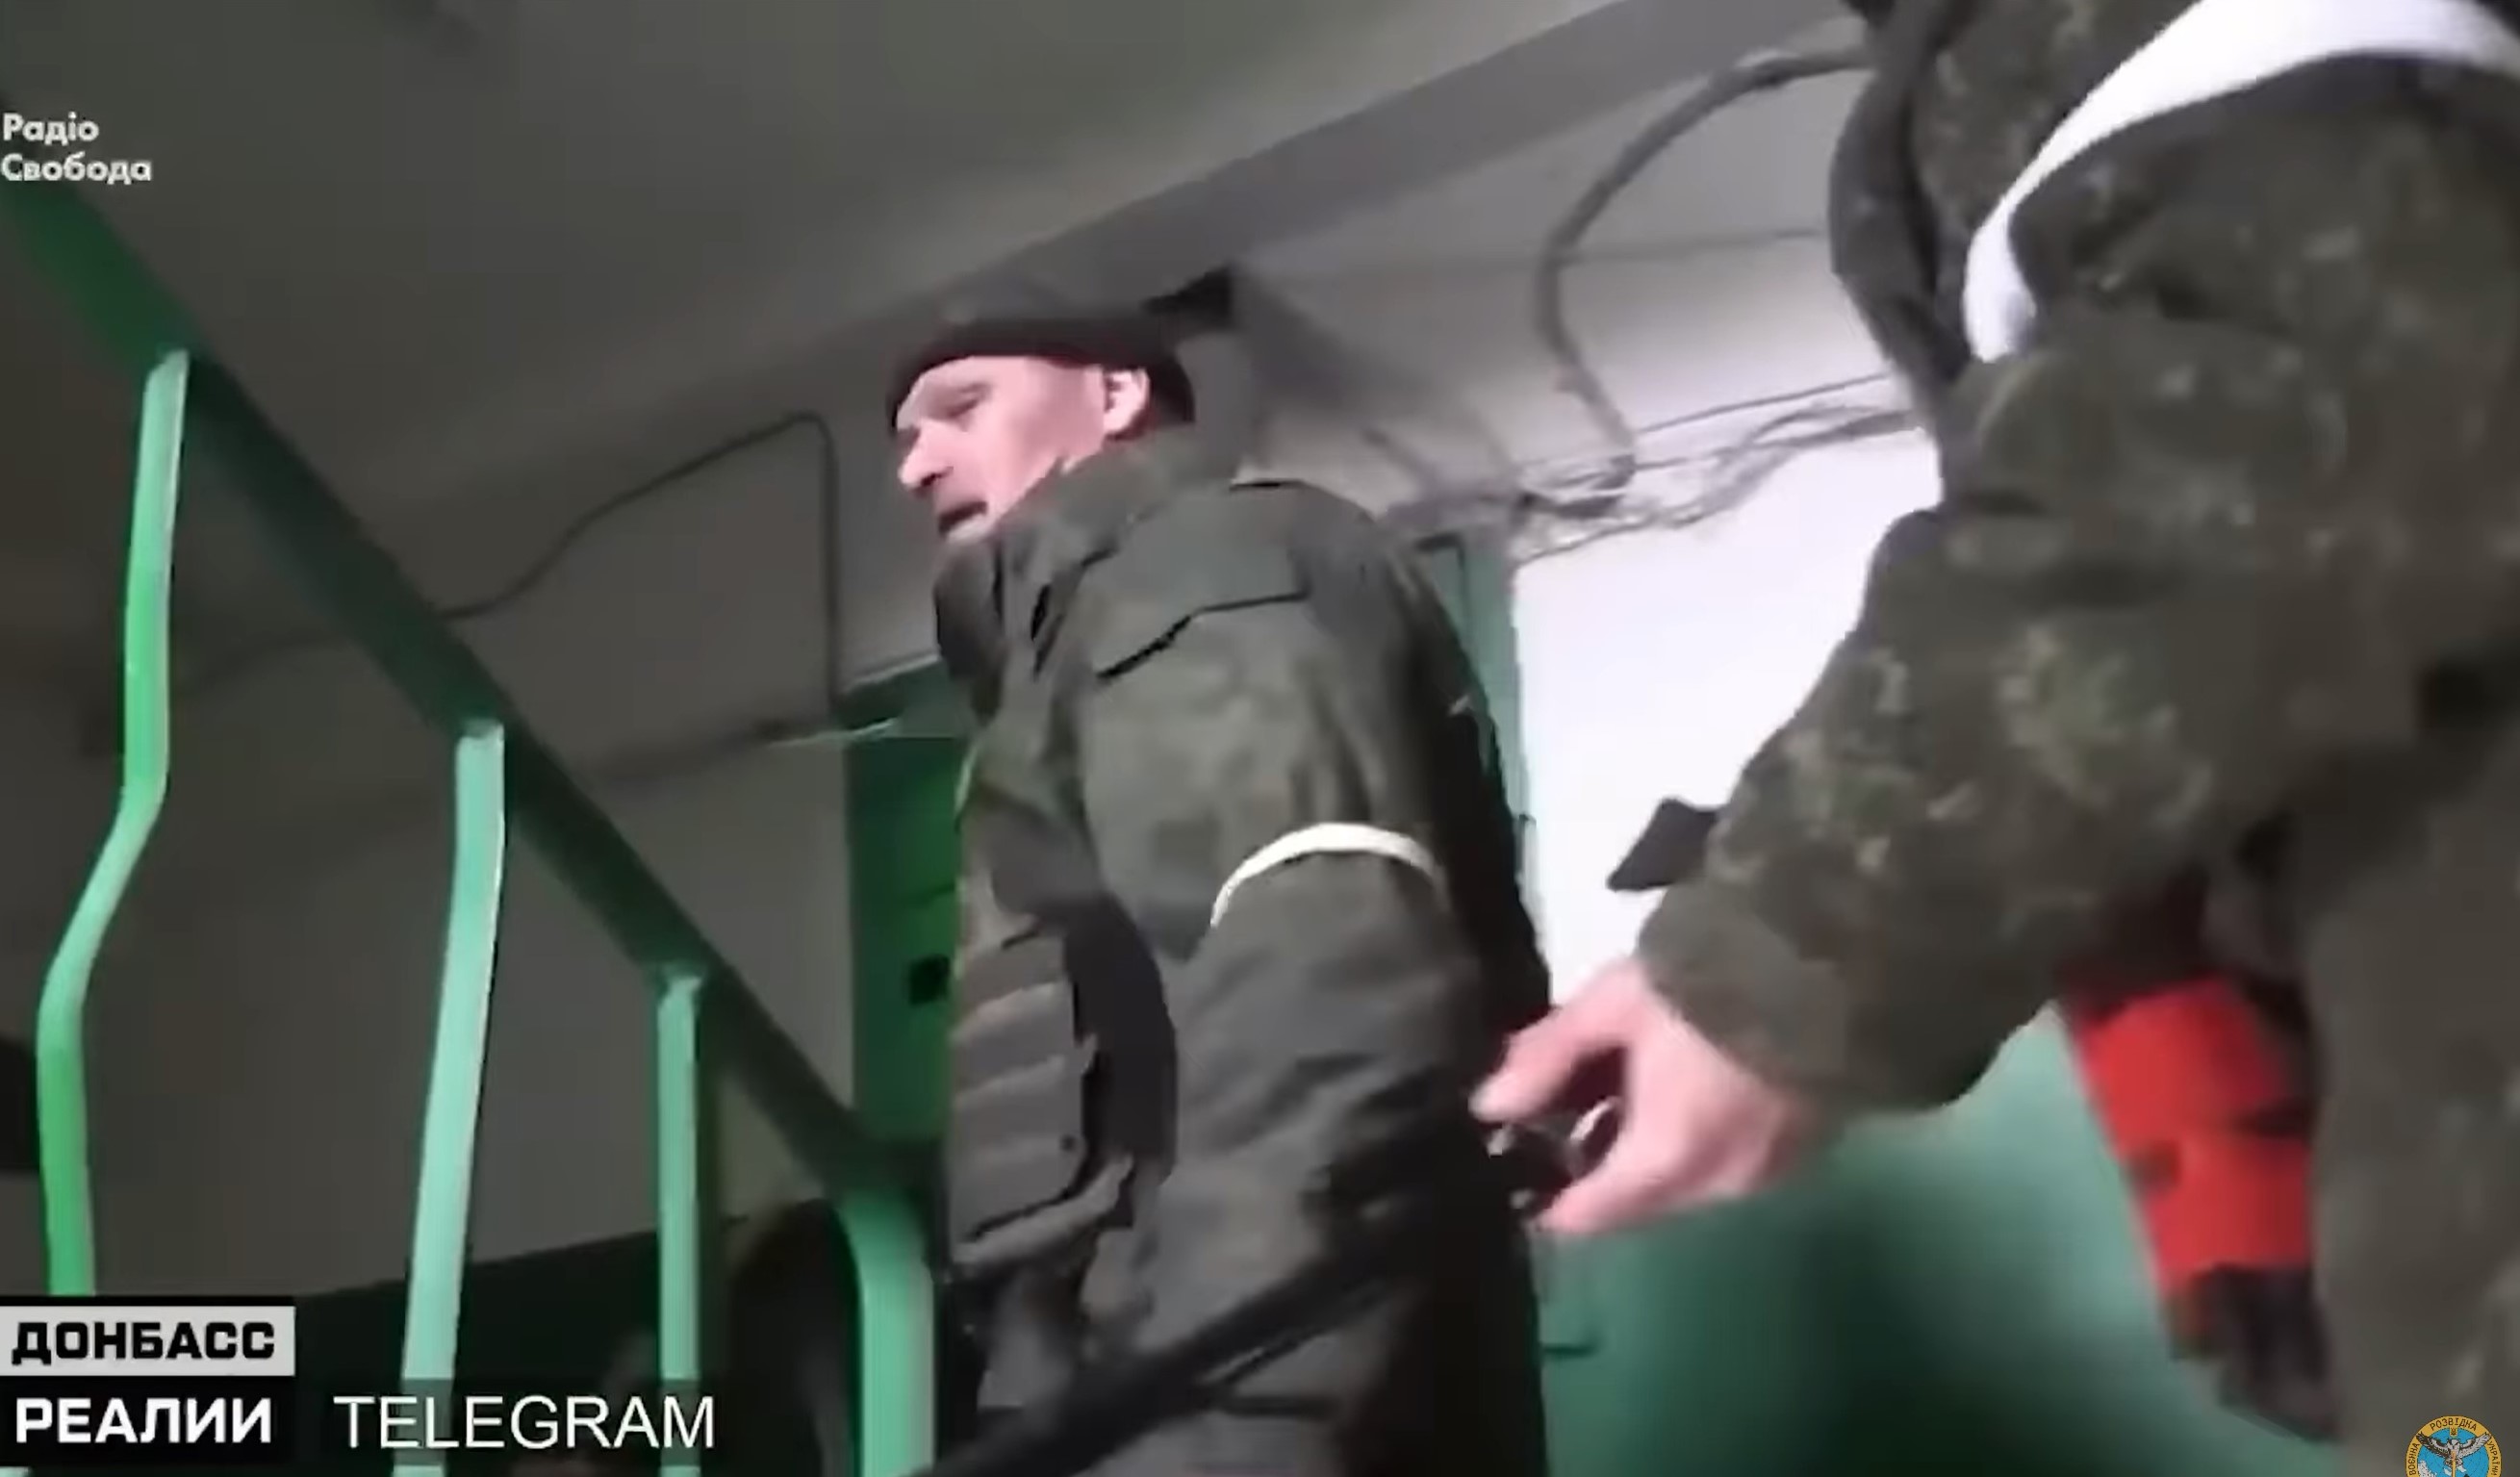 ’Mobilization’ in occupied Donbas From the Donbas Realii video